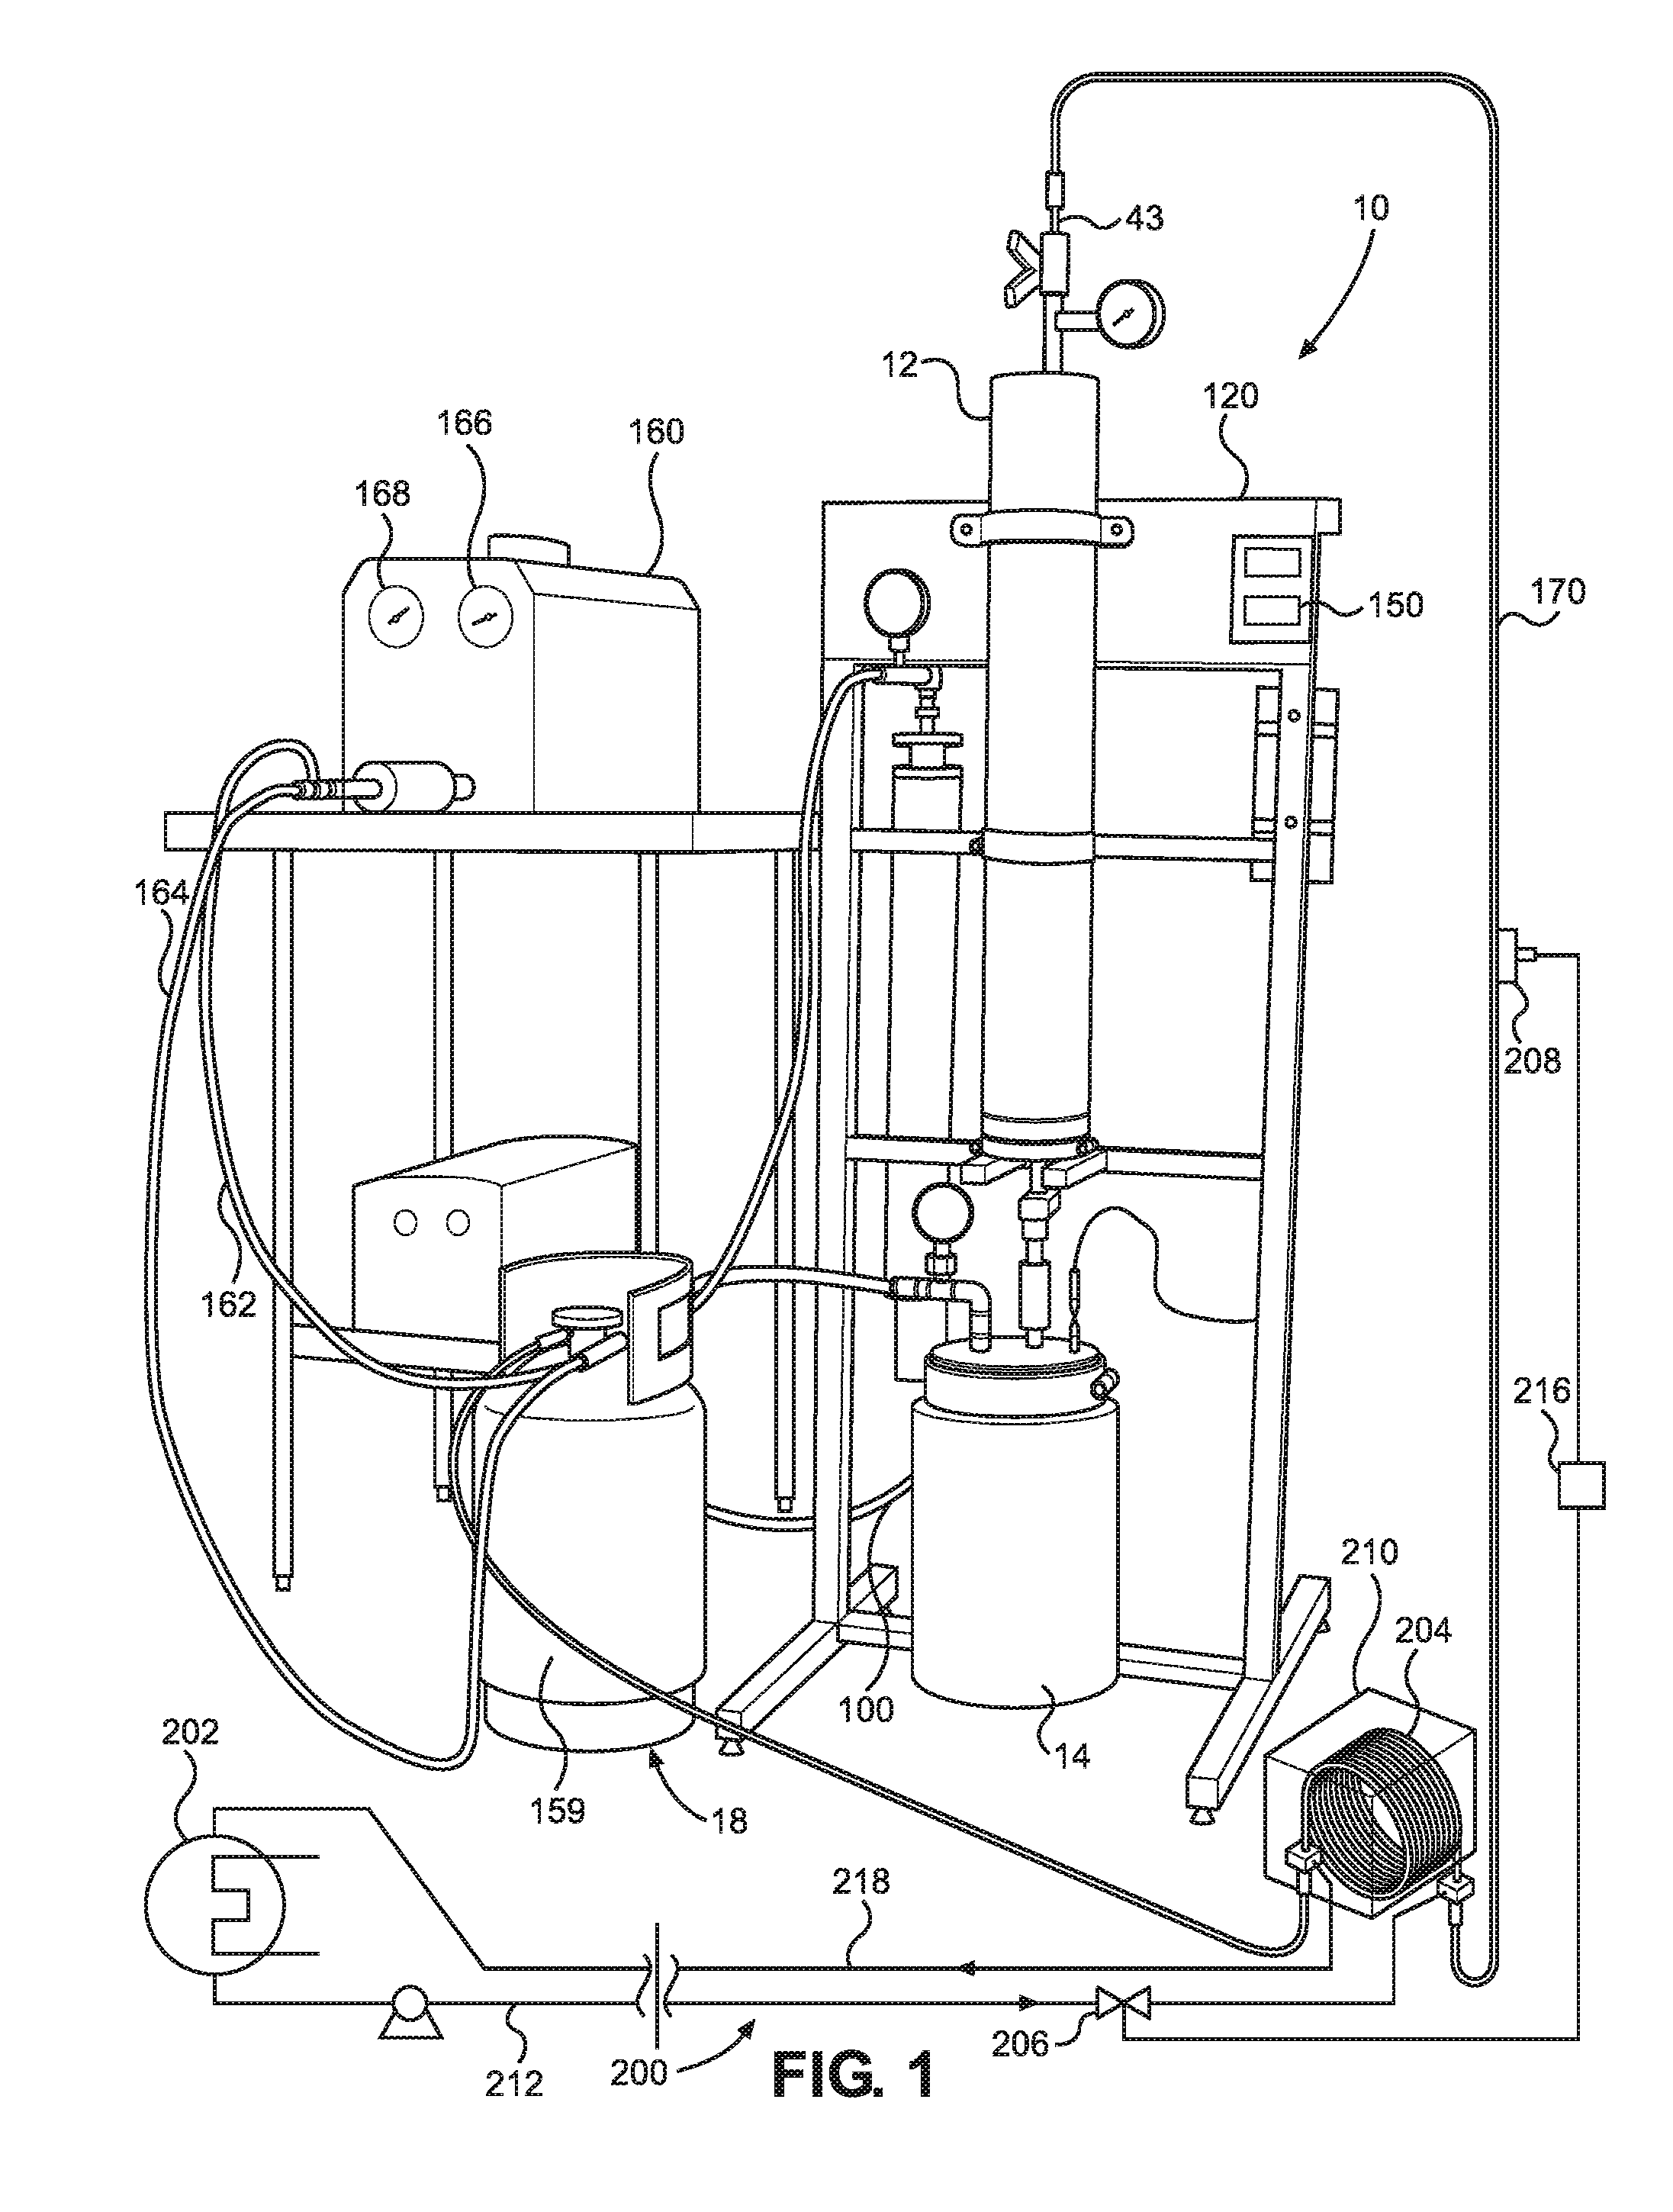 Apparatus for extracting oil from oil-bearing plants